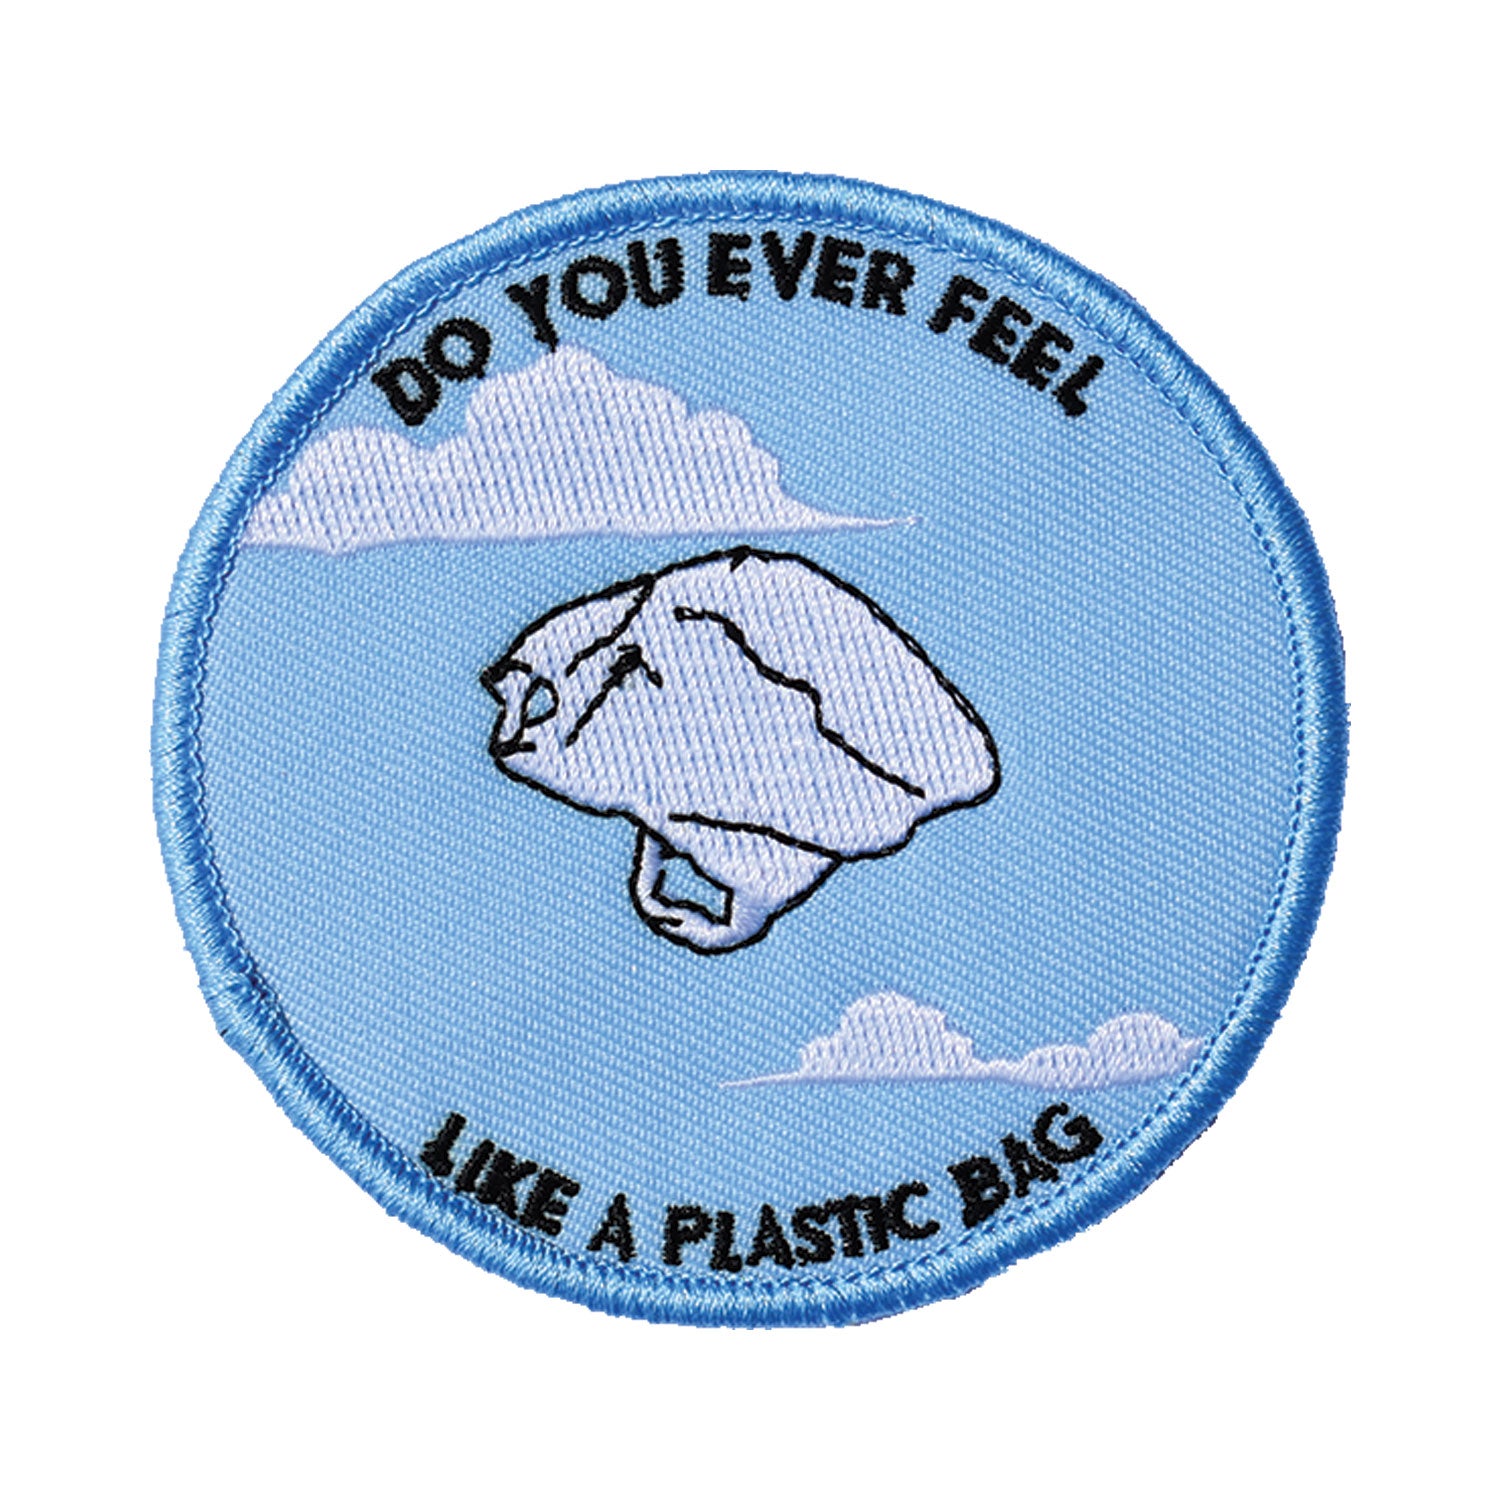 Plastic Bag Embroidered Patch - Retrograde Supply Co